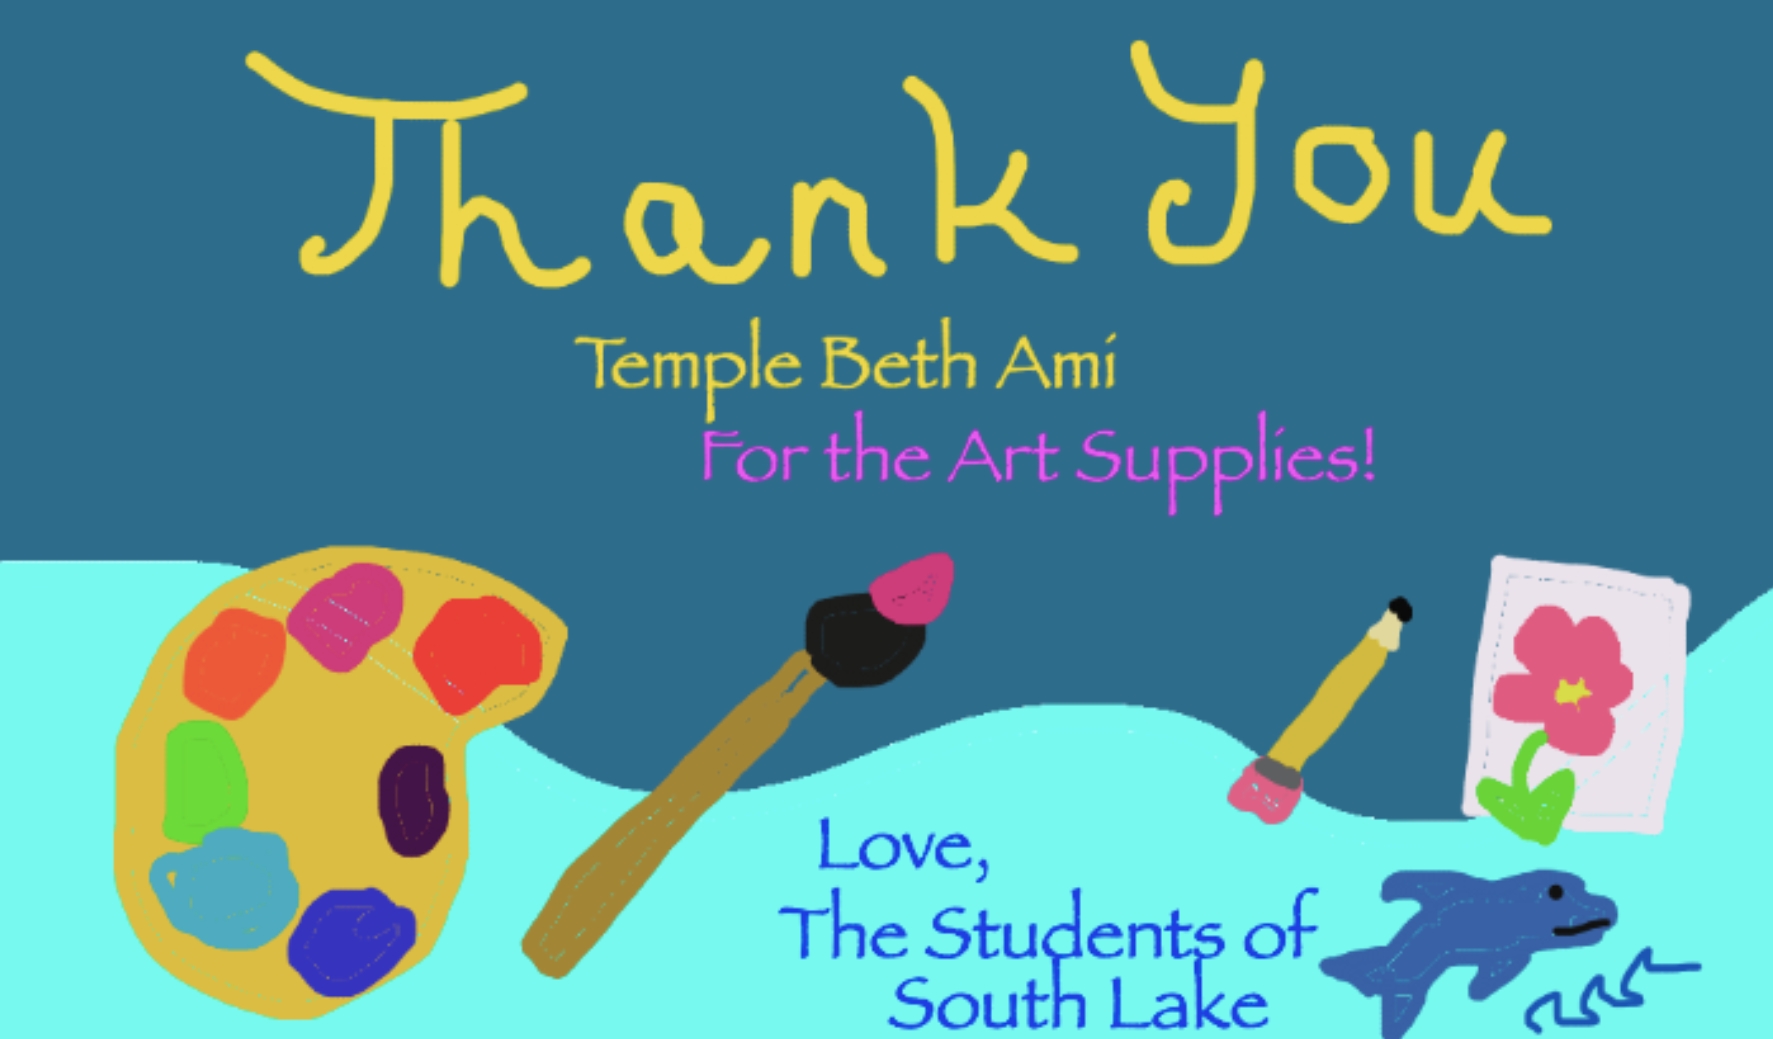 Thank you, Temple Beth Ami, for the Art Supplies! Love, The Students of South Lake